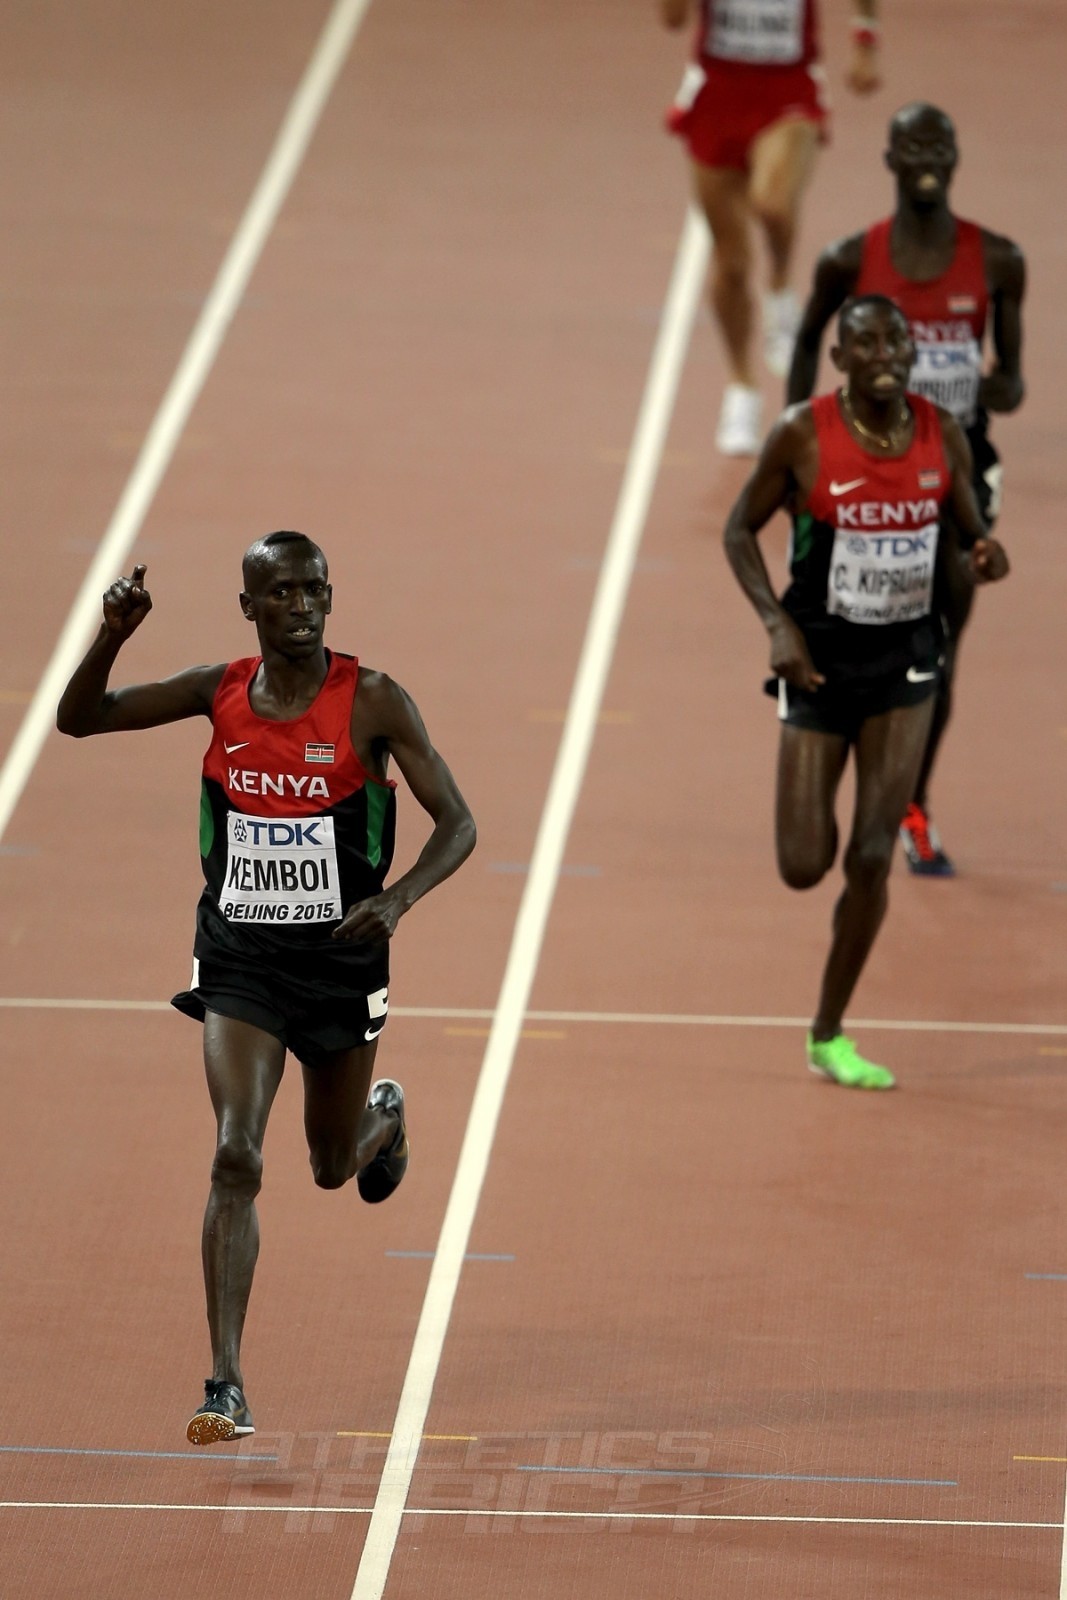 Ezekiel Kemboi of Kenya crosses the finish line to win gold in the Men's 3000 metres steeplechase final during day three of the 15th IAAF World Athletics Championships Beijing 2015 at Beijing National Stadium on August 24, 2015 in Beijing, China. (Photo by Lintao Zhang/Getty Images for IAAF)